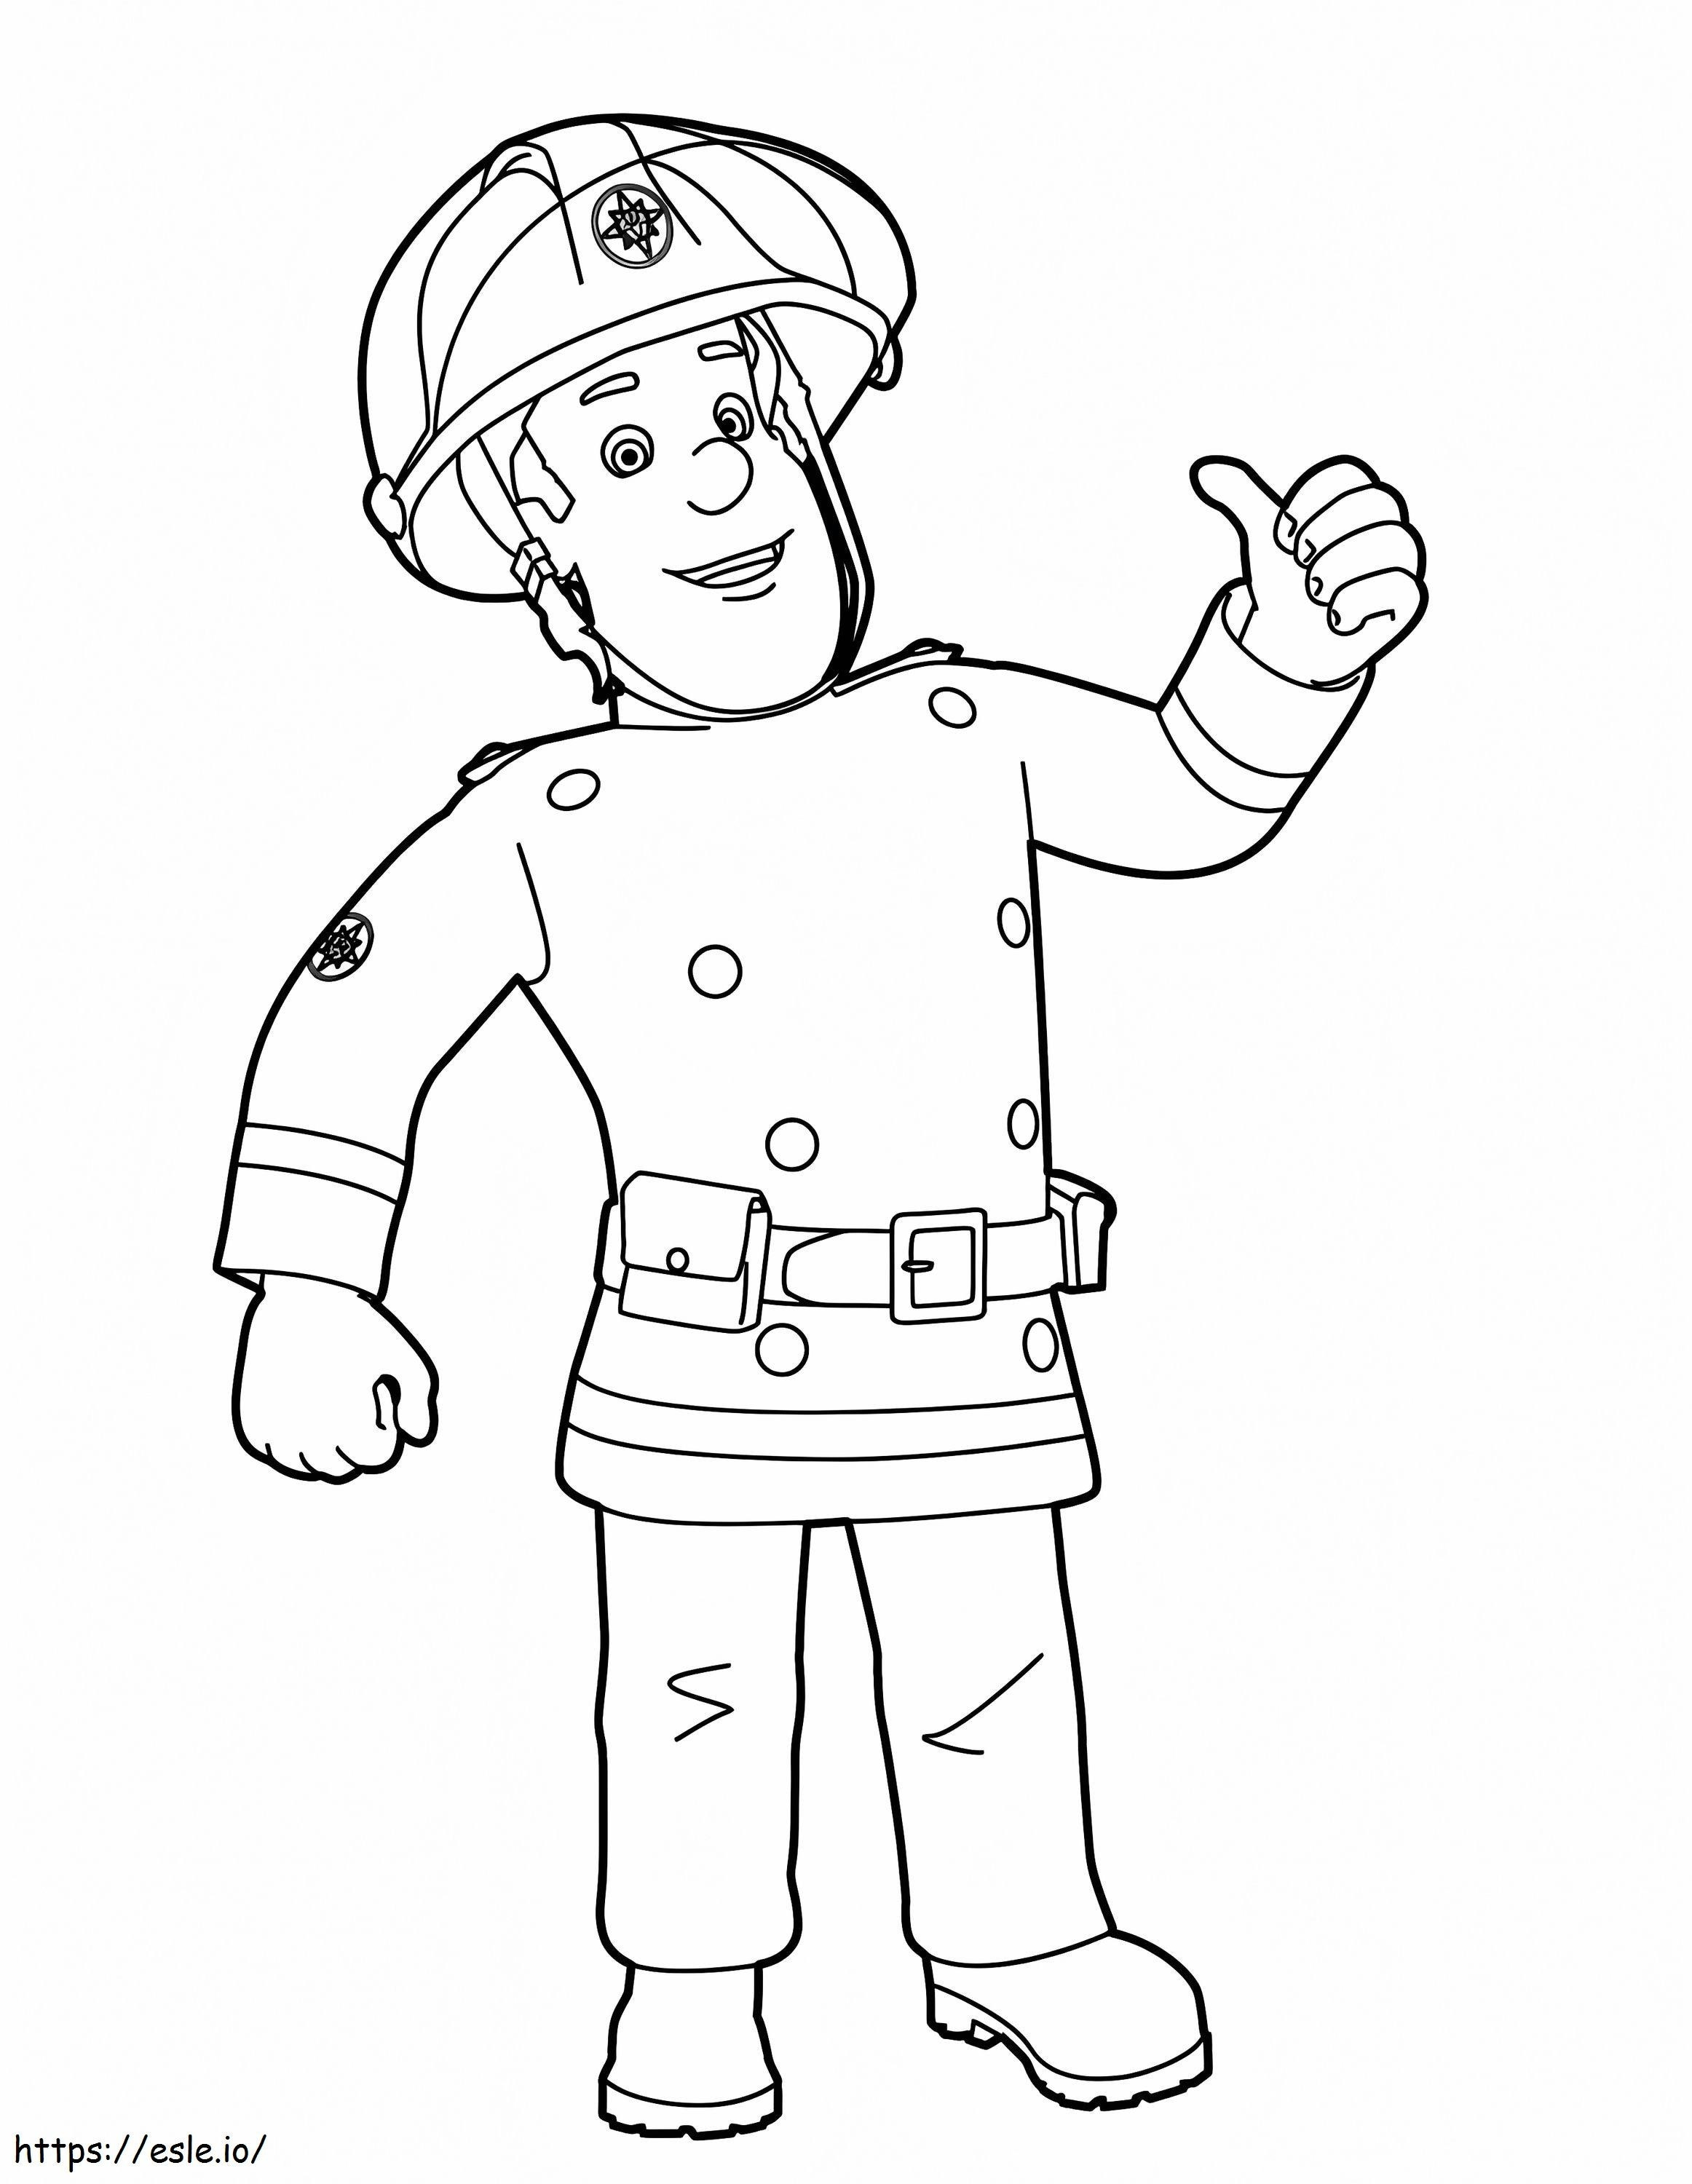 1582621527 Coloring For Kids Fireman Sam 14407 coloring page